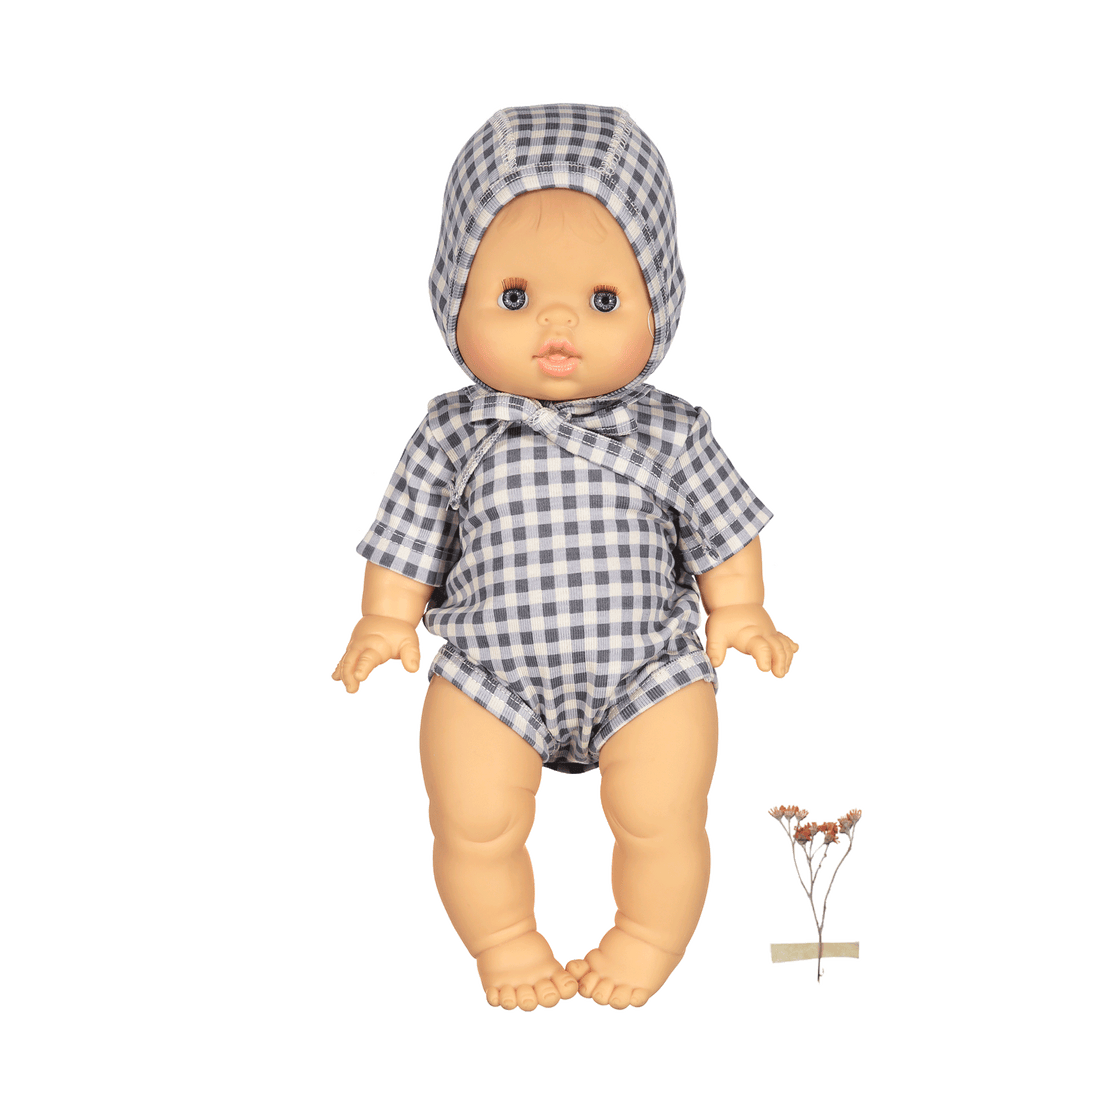 The Printed Doll Clothes - Steel Gingham